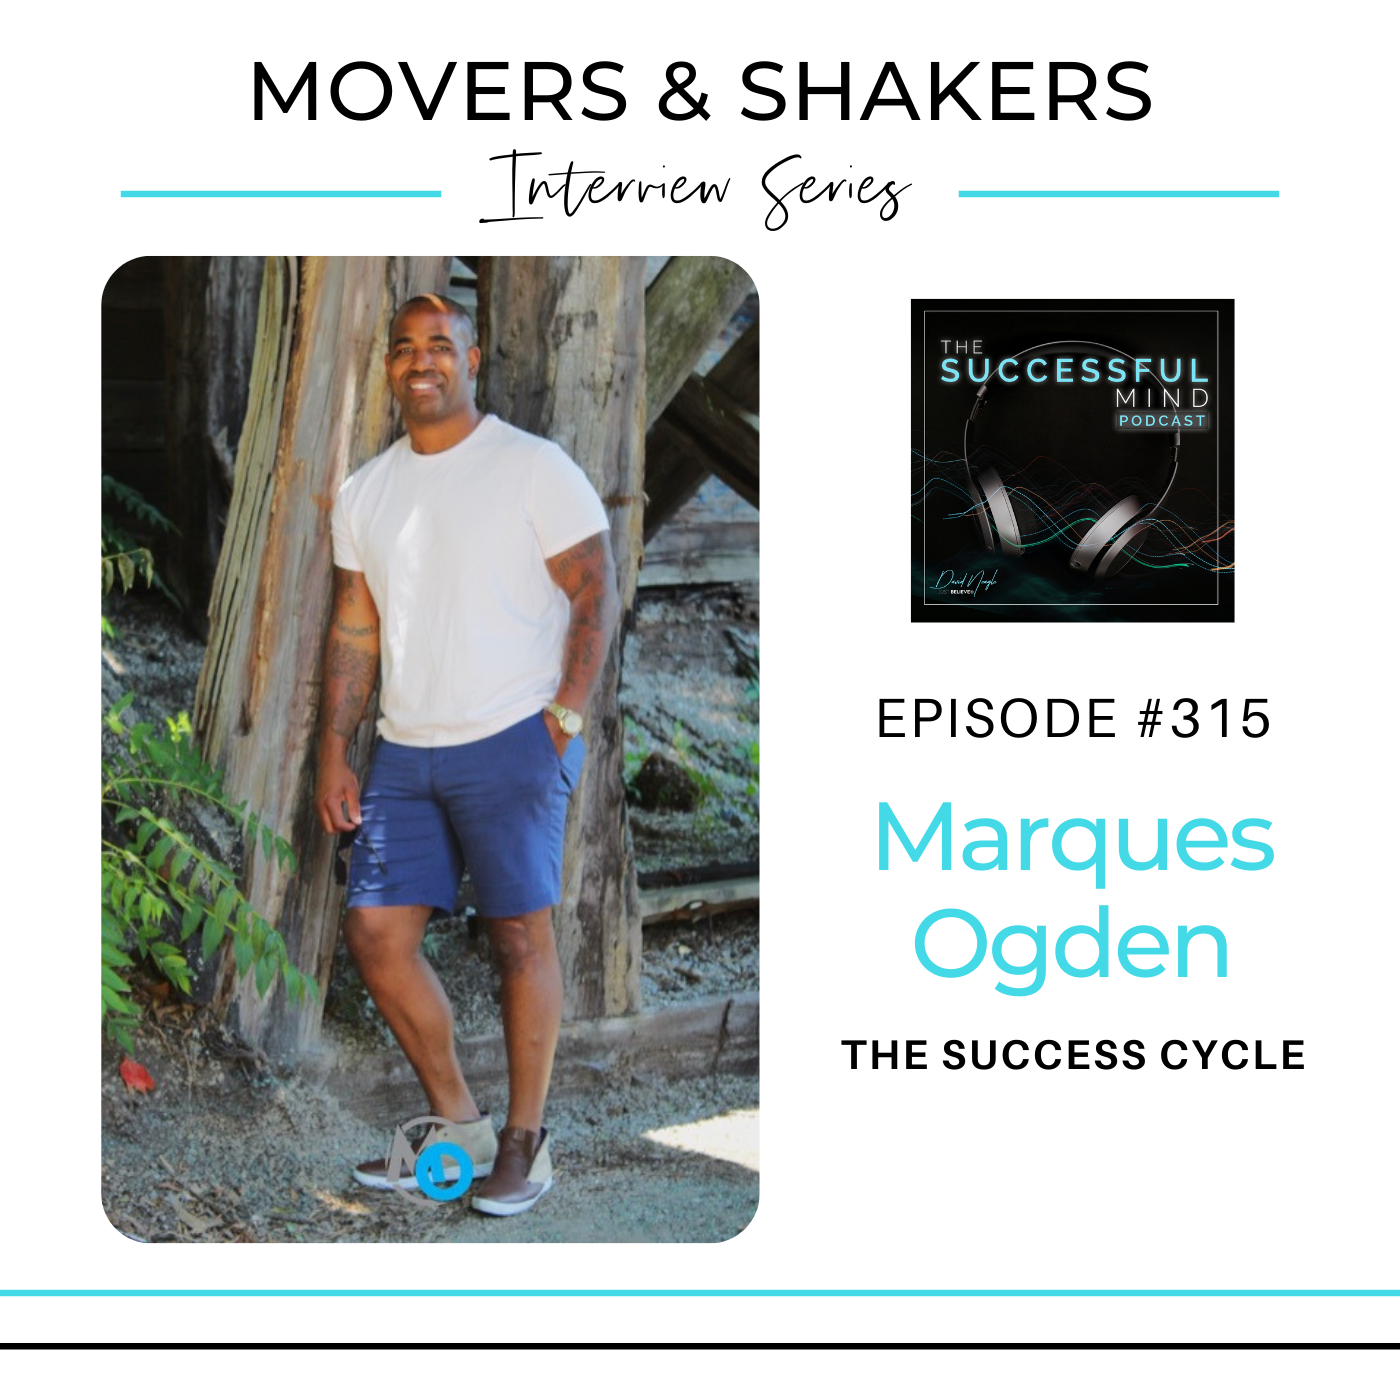 Movers & Shakers - Episode 315 - Marques Ogden - The Success Cycle